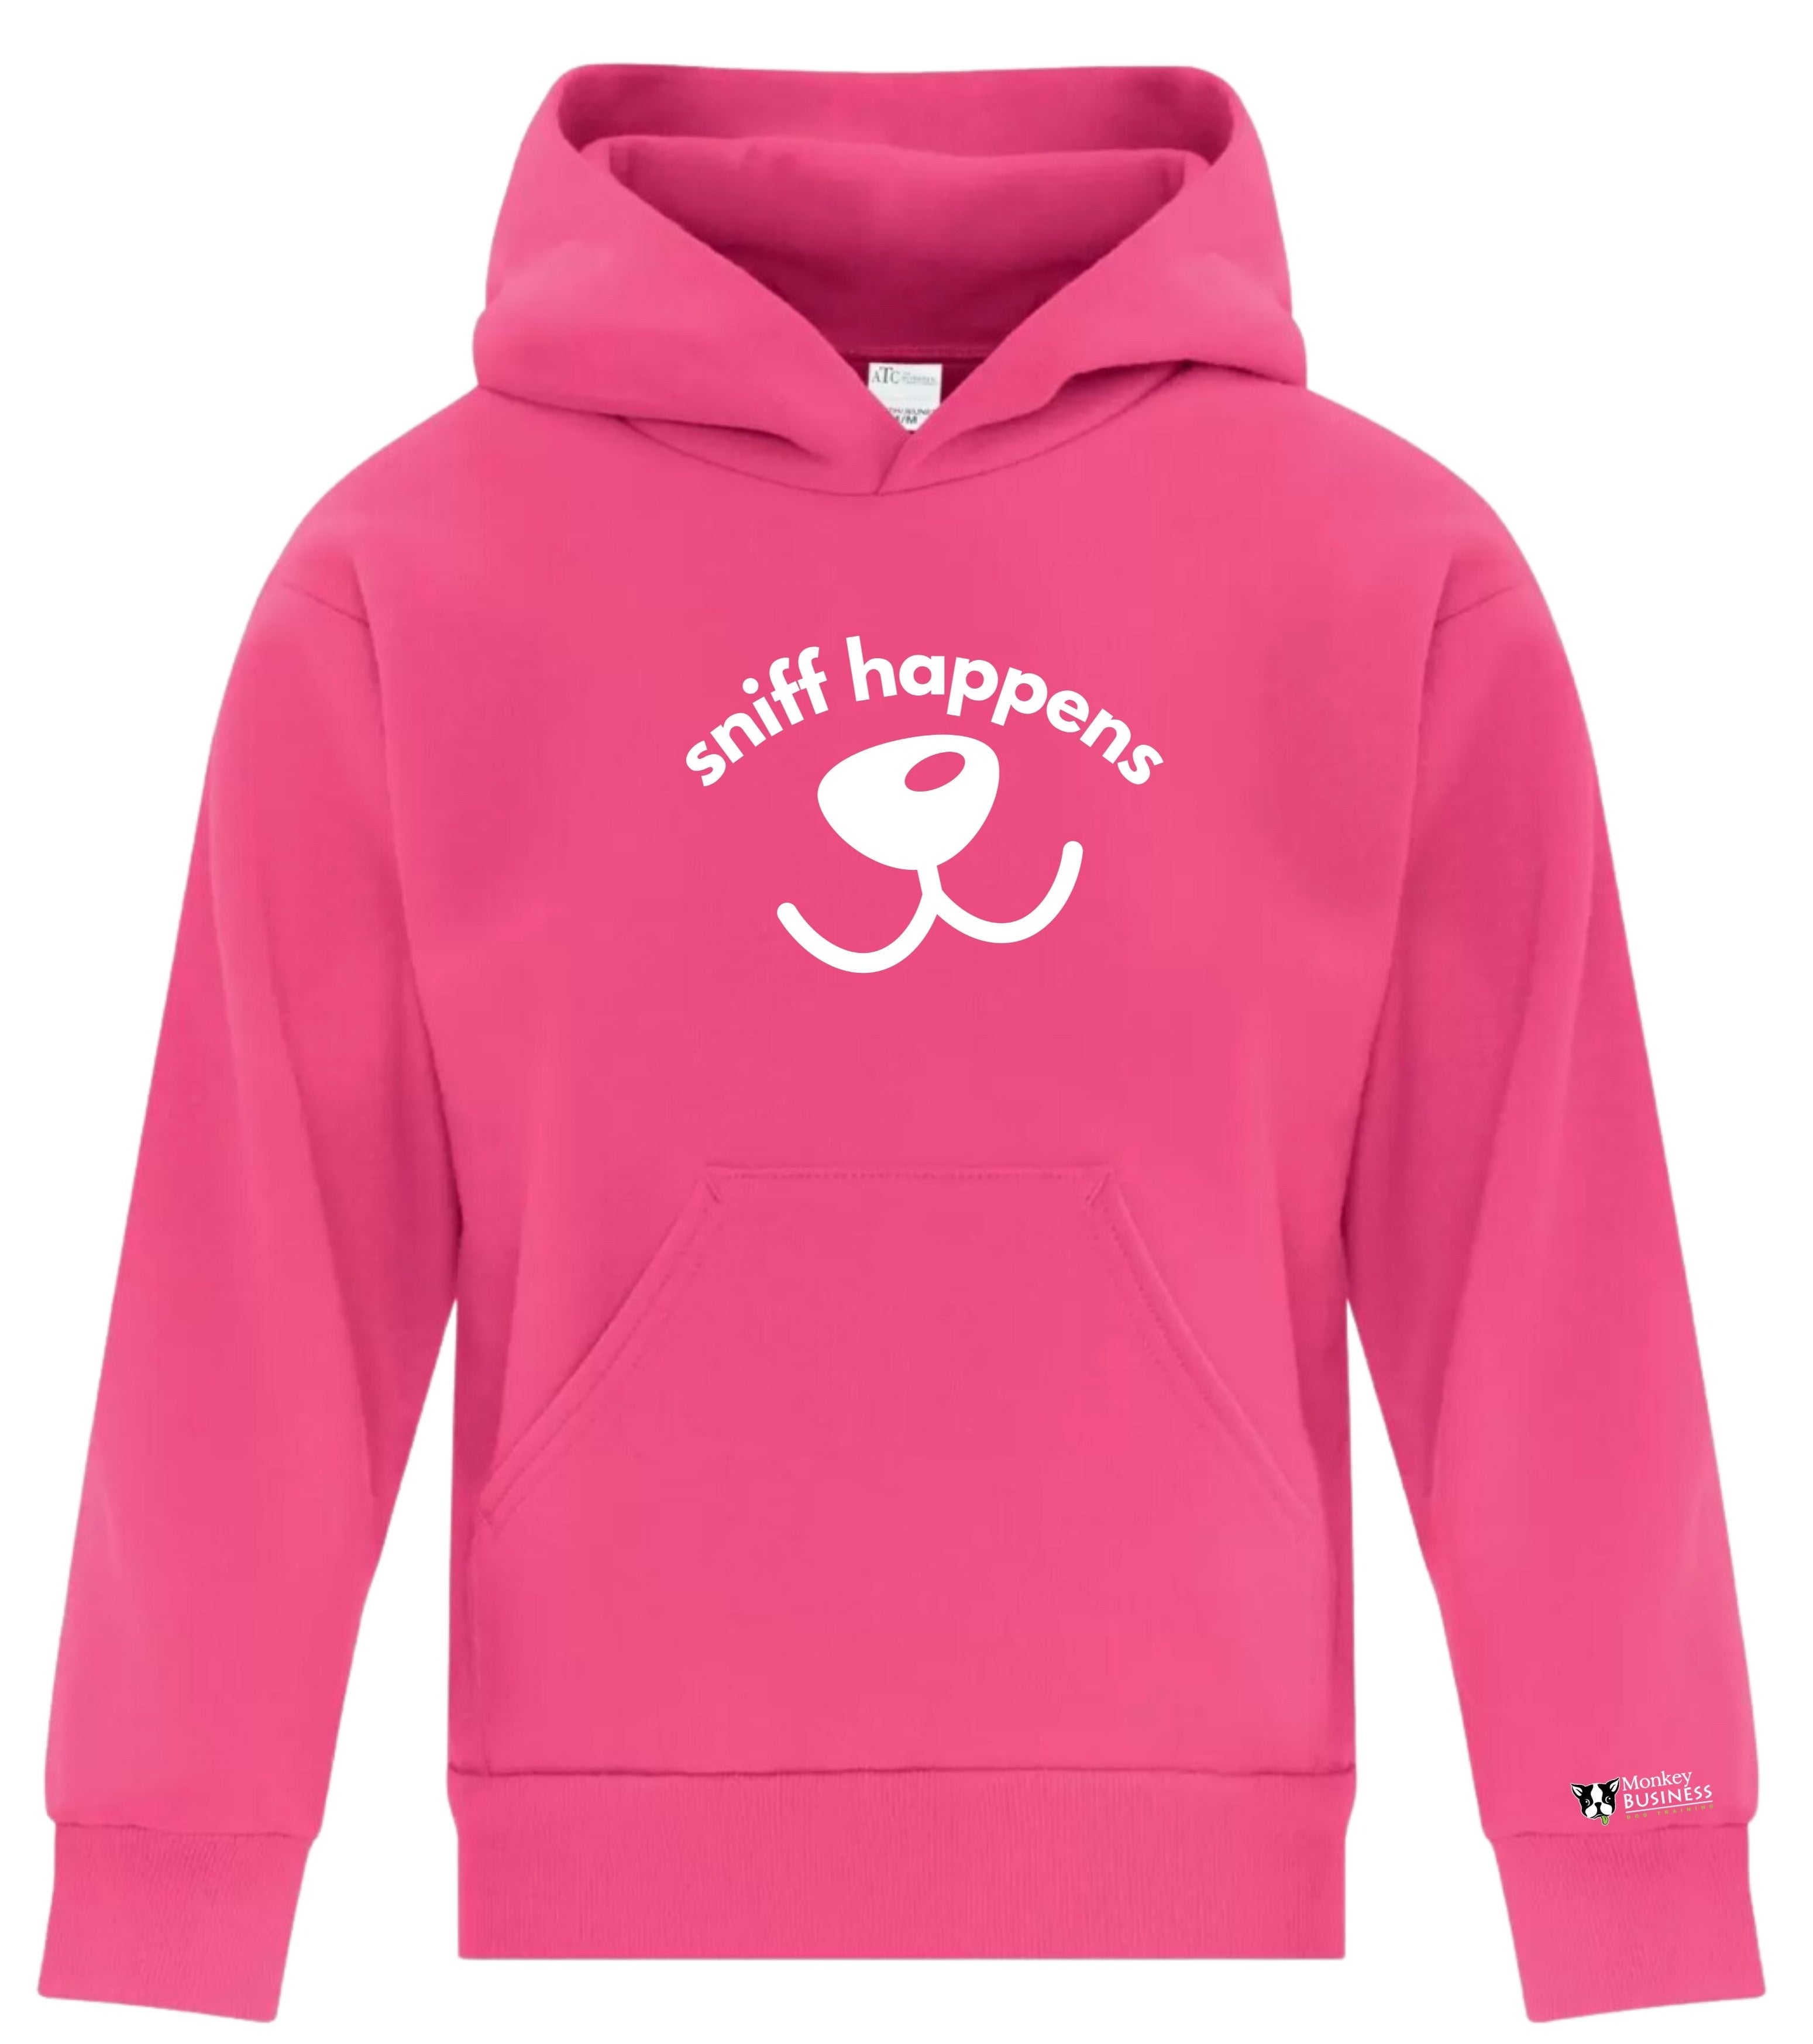 MB Youth Hoodie- Sniff Happens